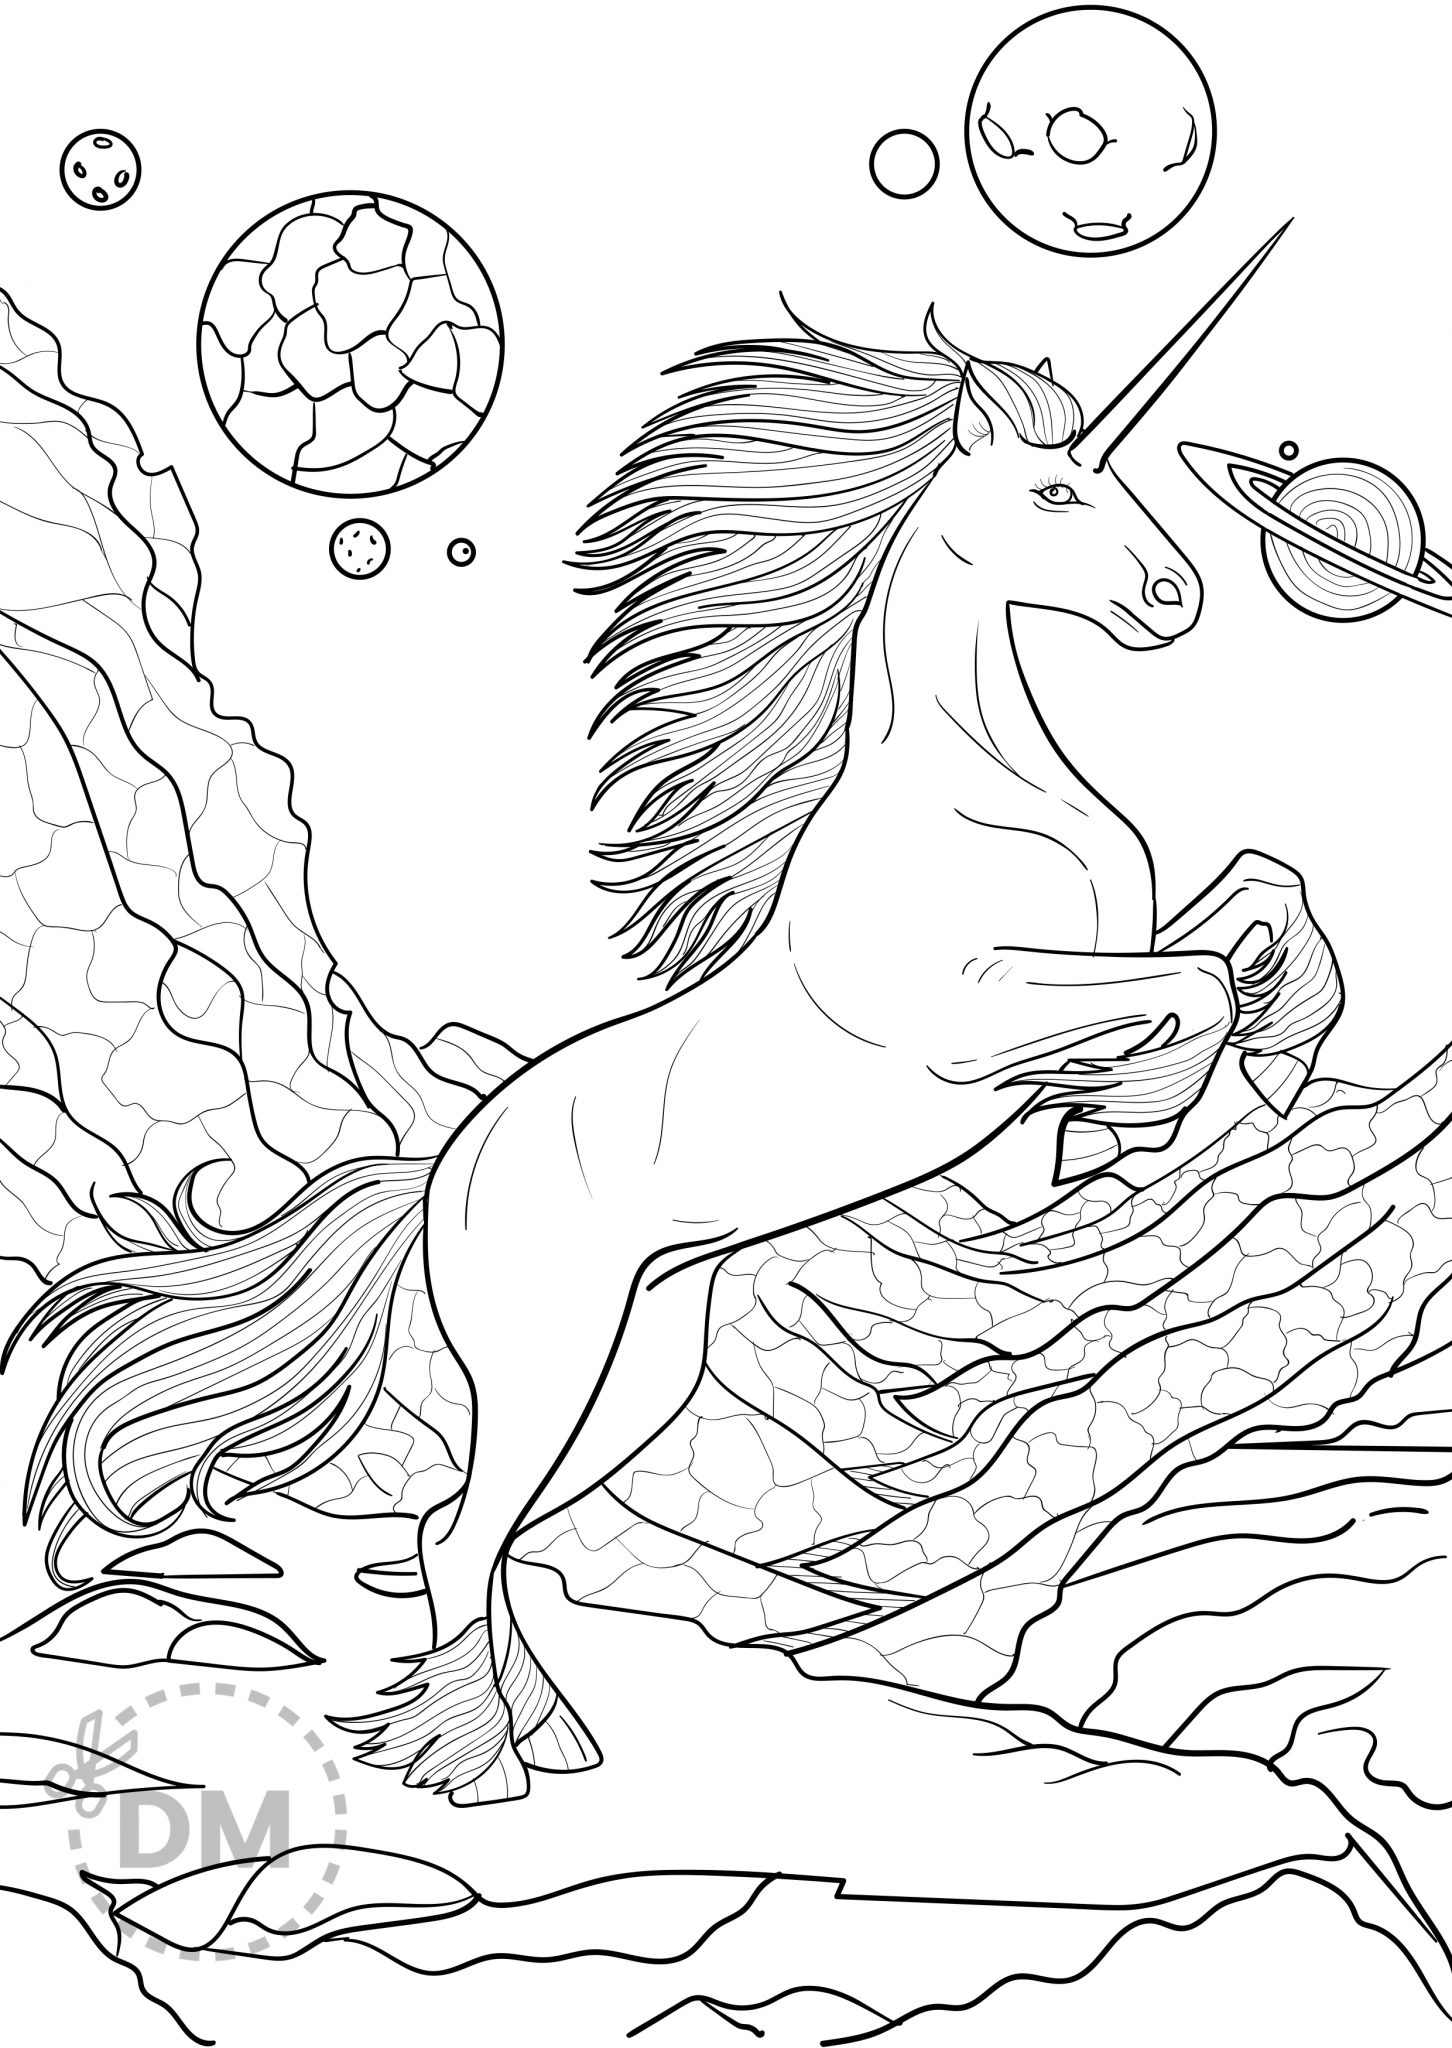 unicorn-coloring-page-for-adults-printable-page-for-download-diy-magazine